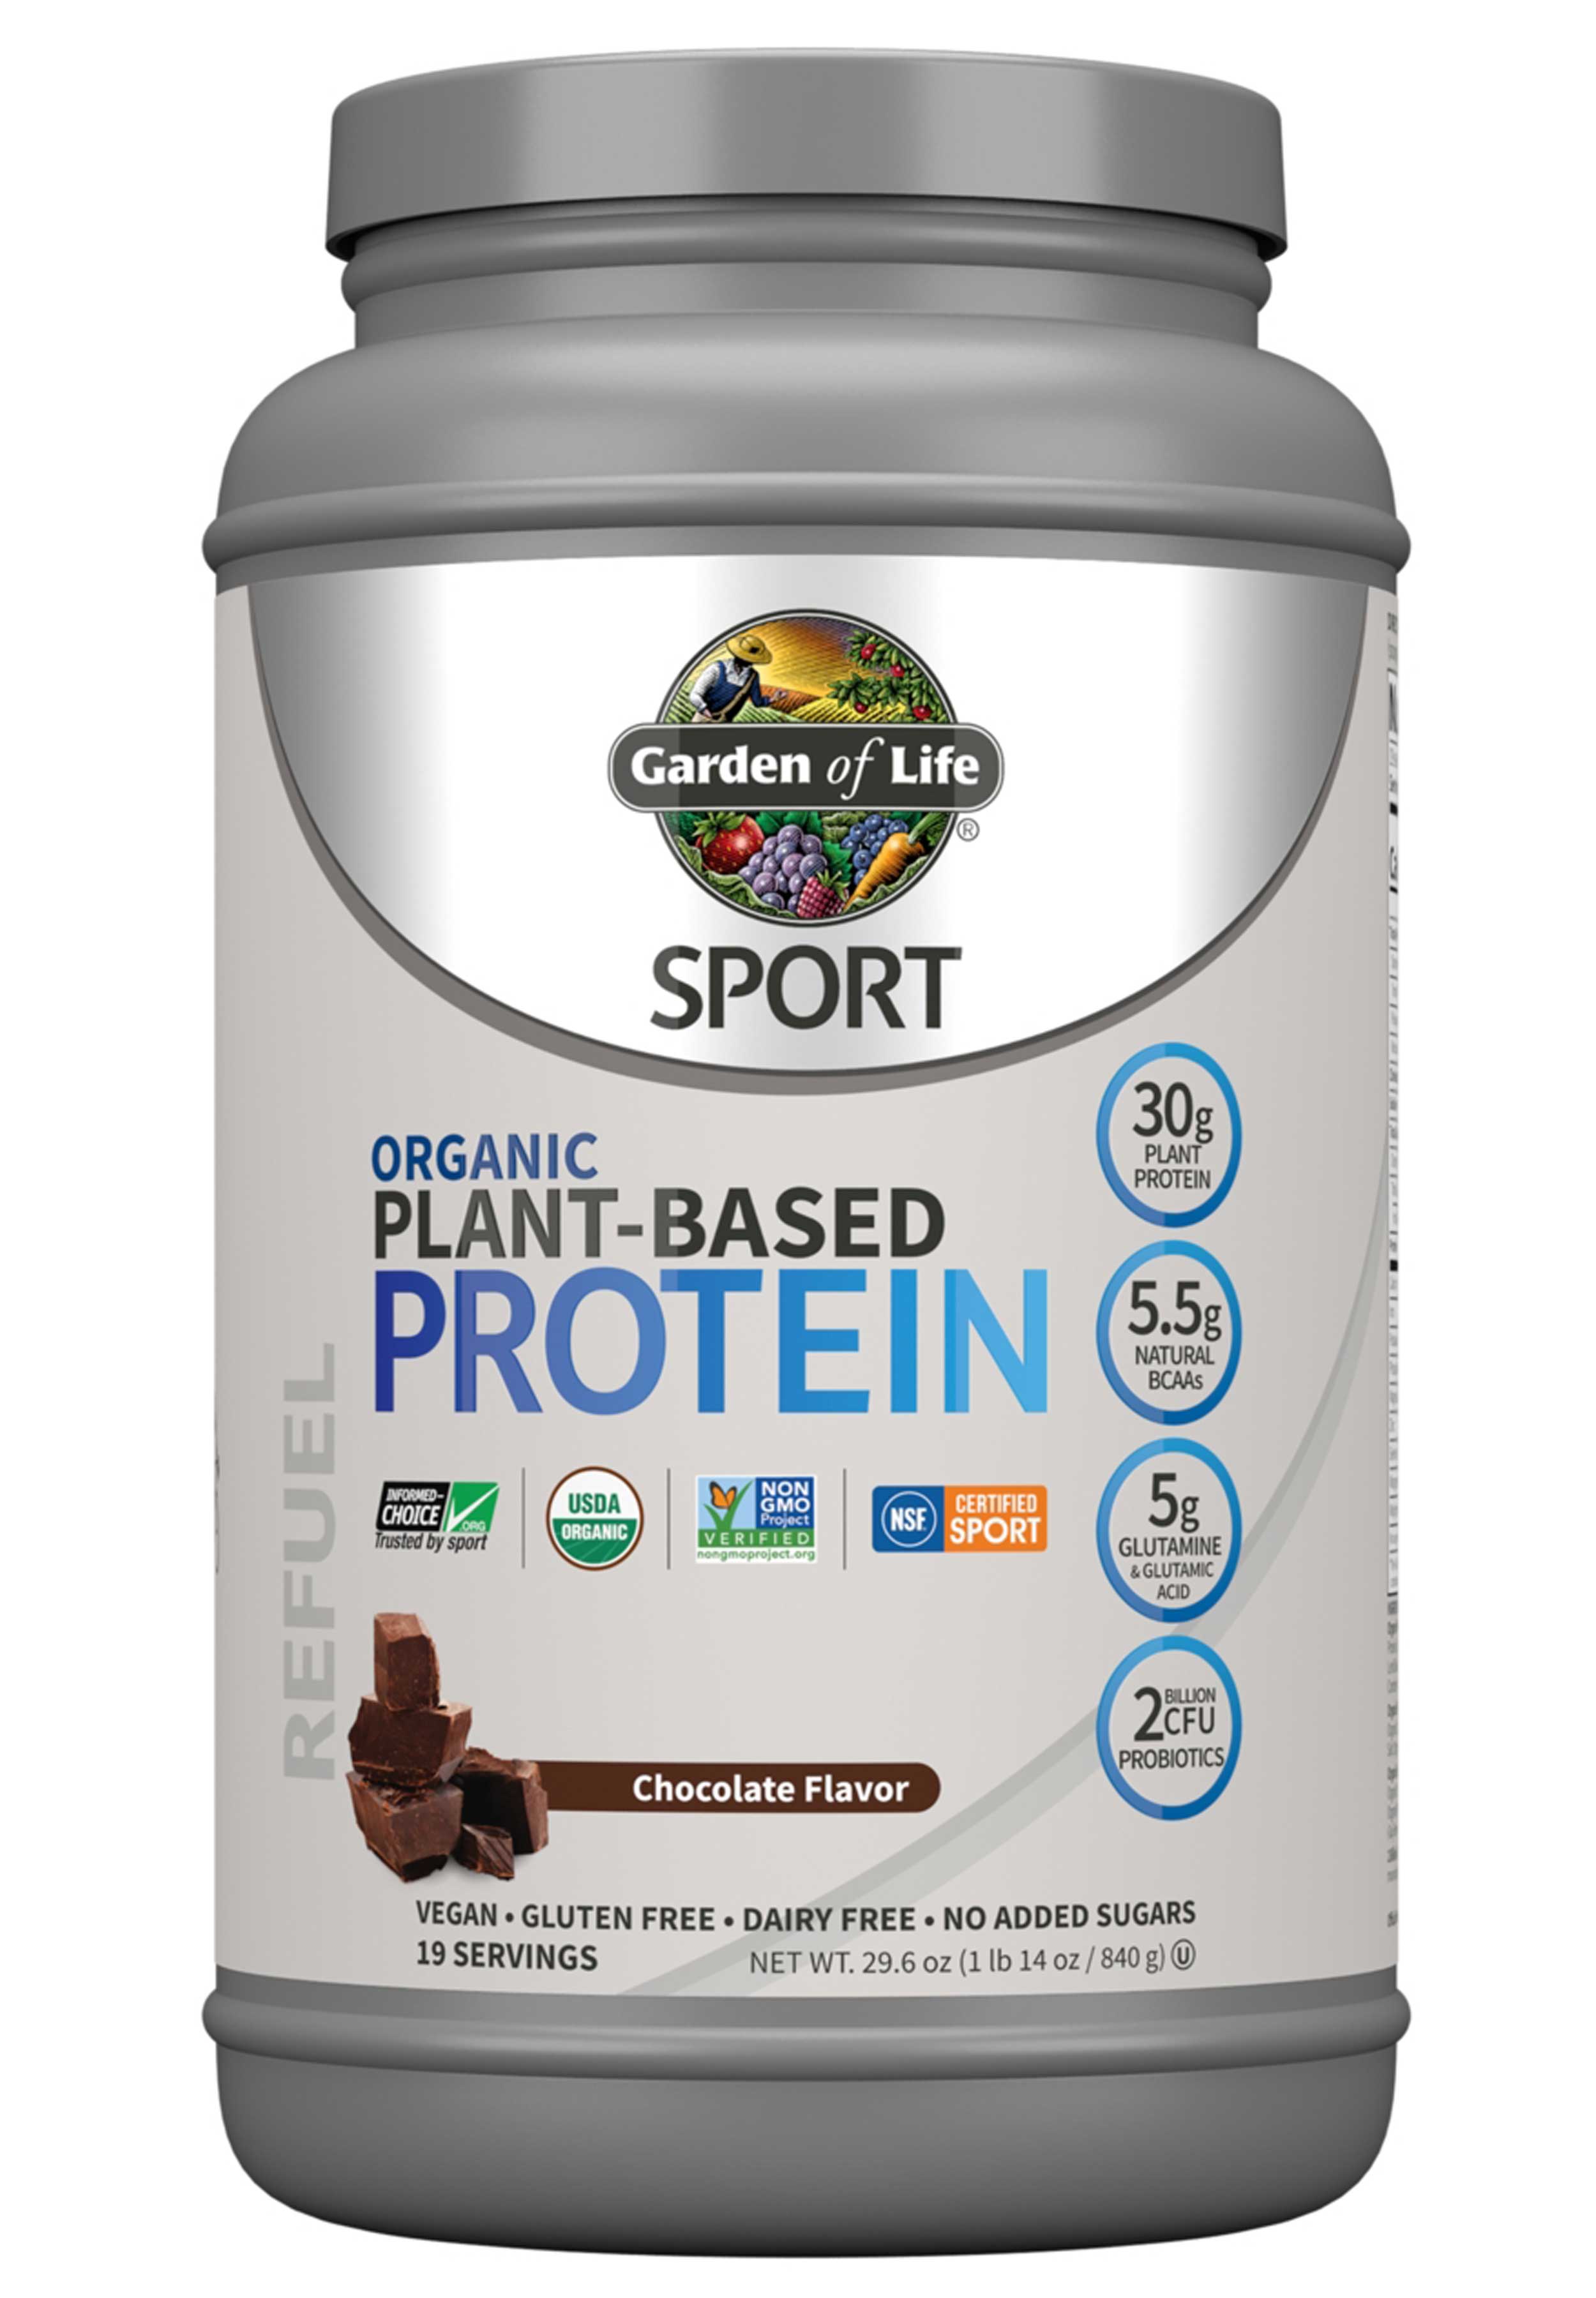 Garden of Life SPORT Organic Plant-Based Protein Chocolate